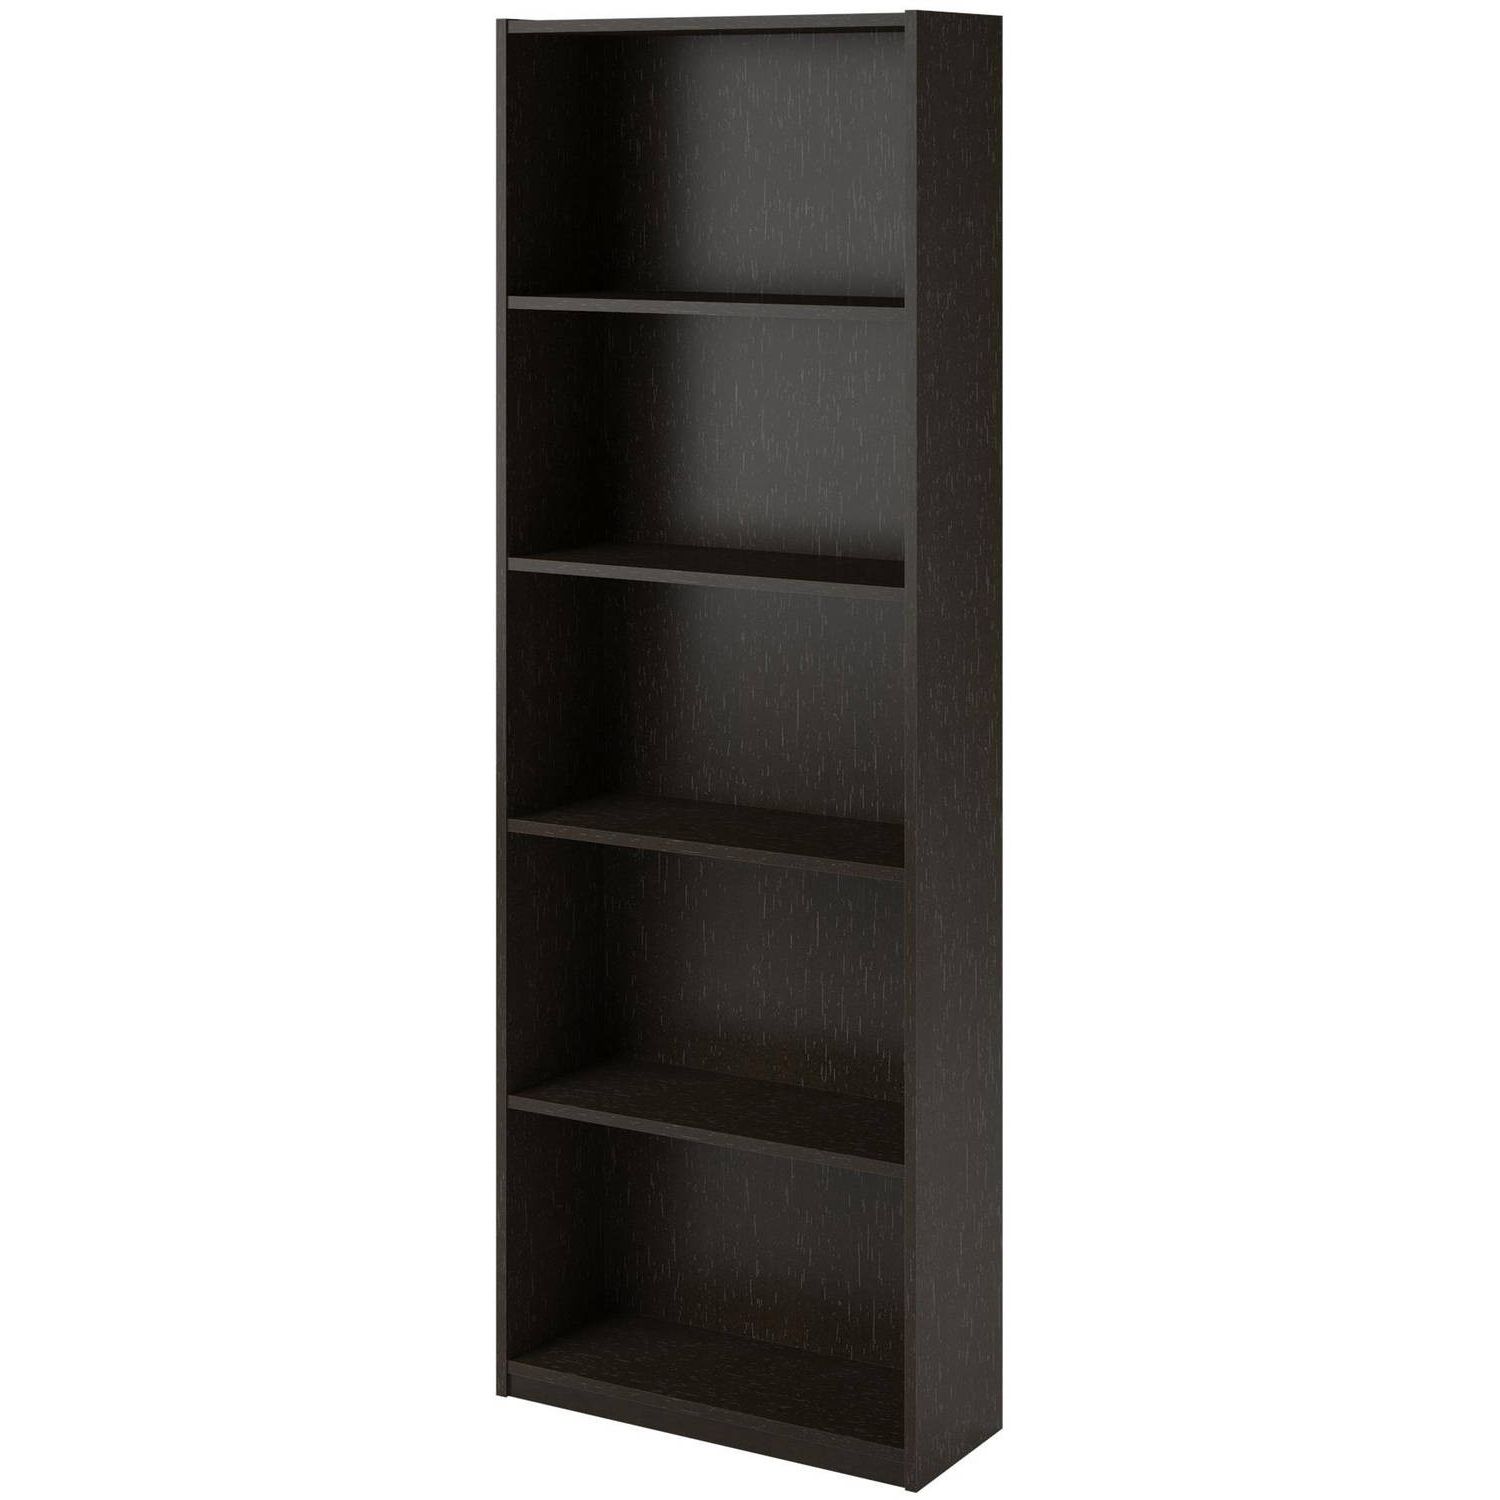 Newest Furniture : Amazing Bookcases From Walmart New Ameriwood 5 Shelf With Walmart 3 Shelf Bookcases (View 8 of 15)